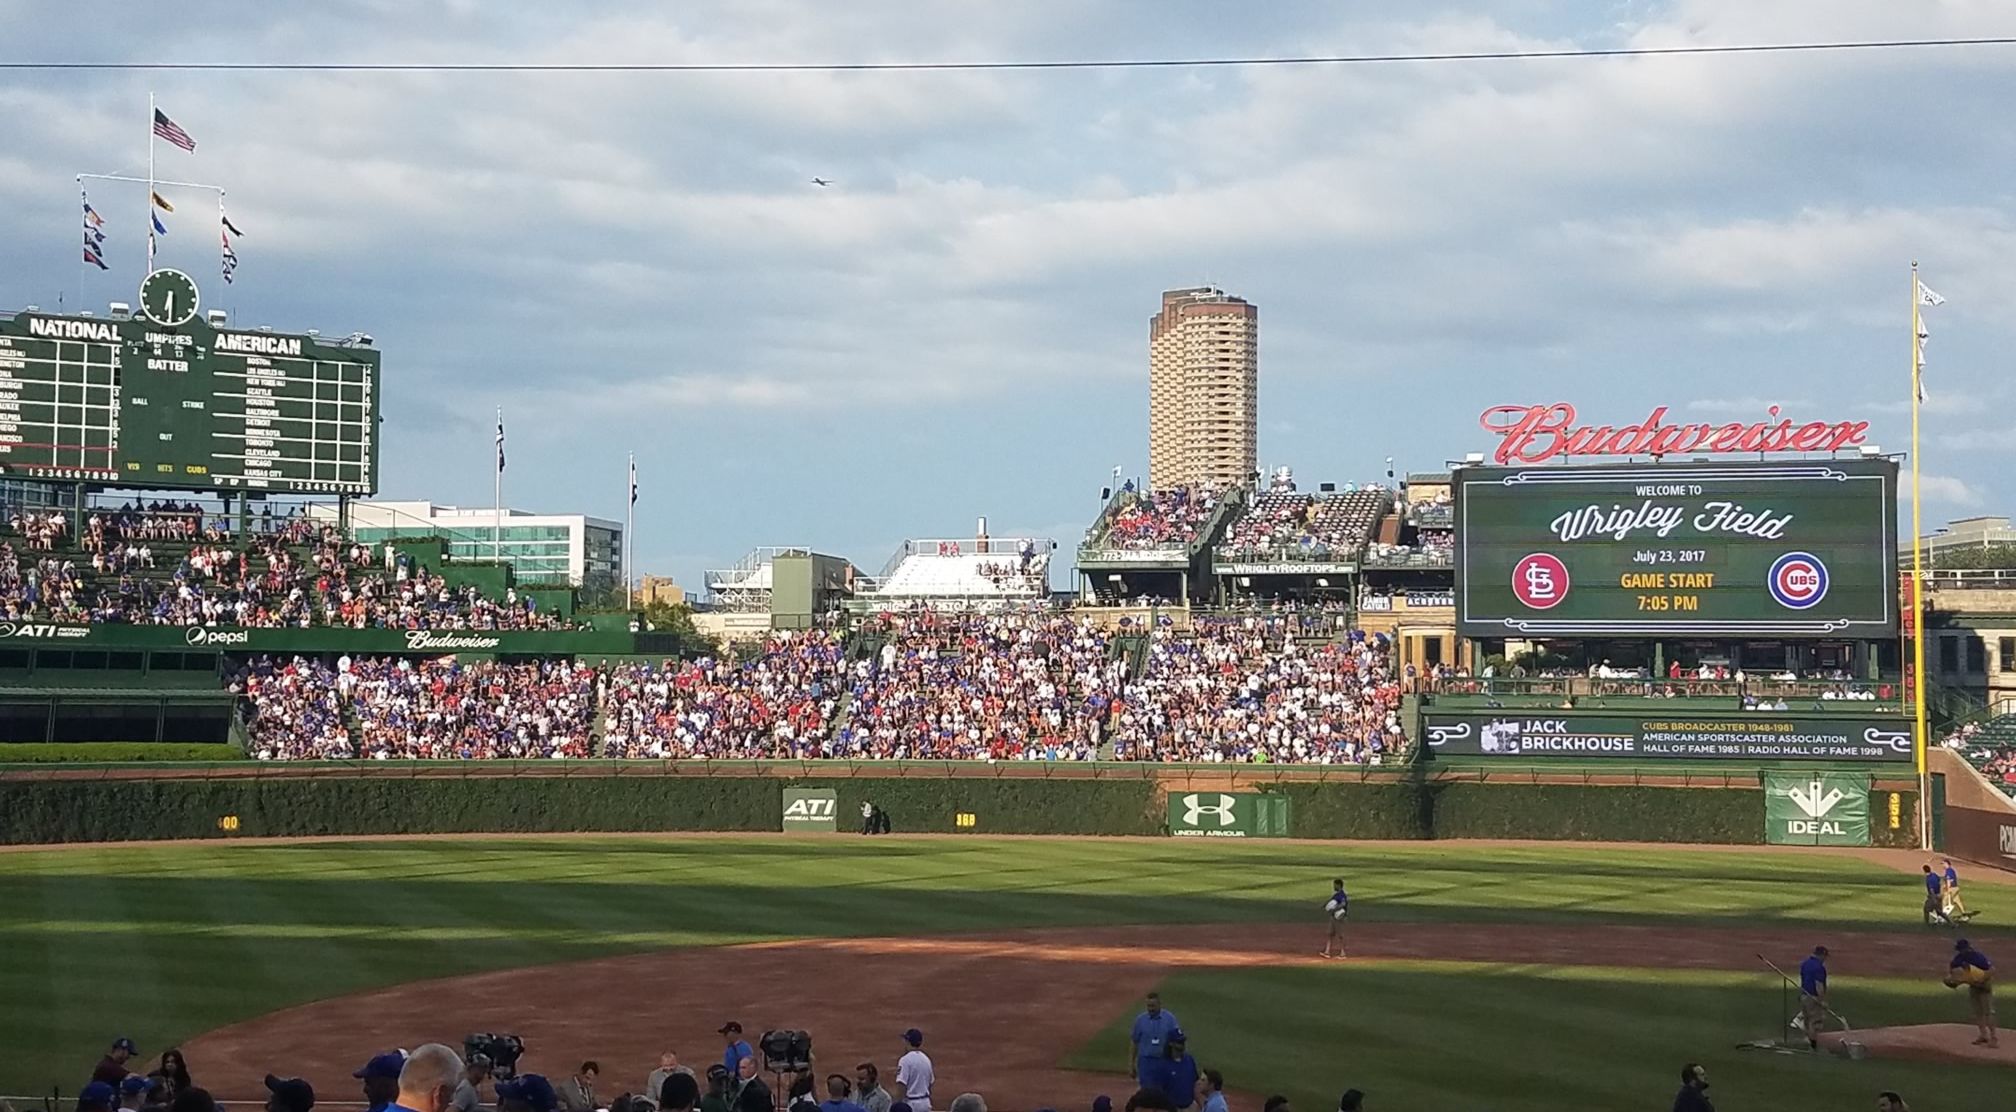 Chicago Cubs Outfielders Connection to the Wrigley Field Bleachers 